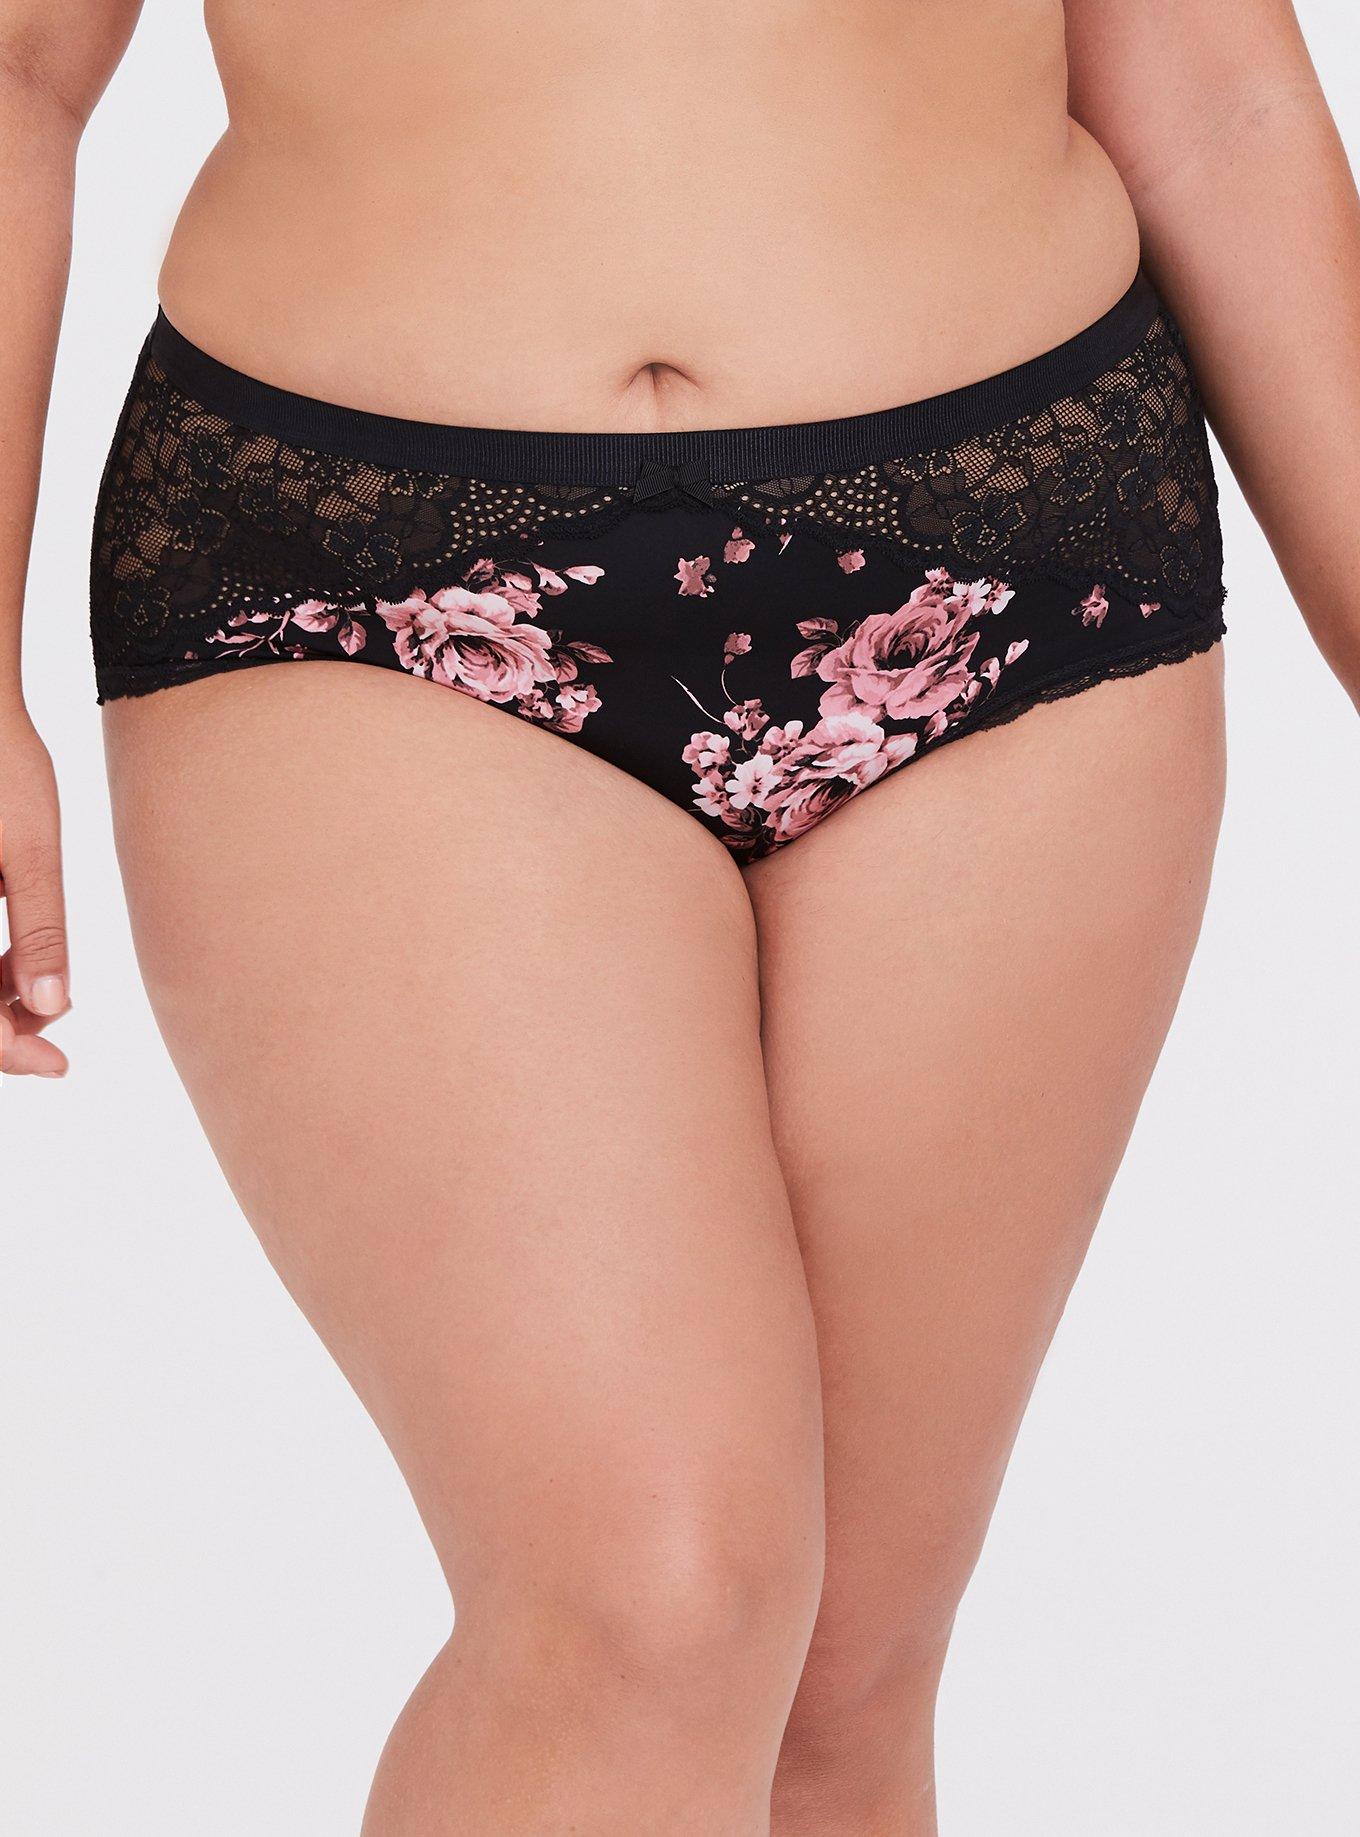 Plus Size - Breast Cancer Awareness - Floral Microfiber & Lace Cheeky Panty  - Torrid